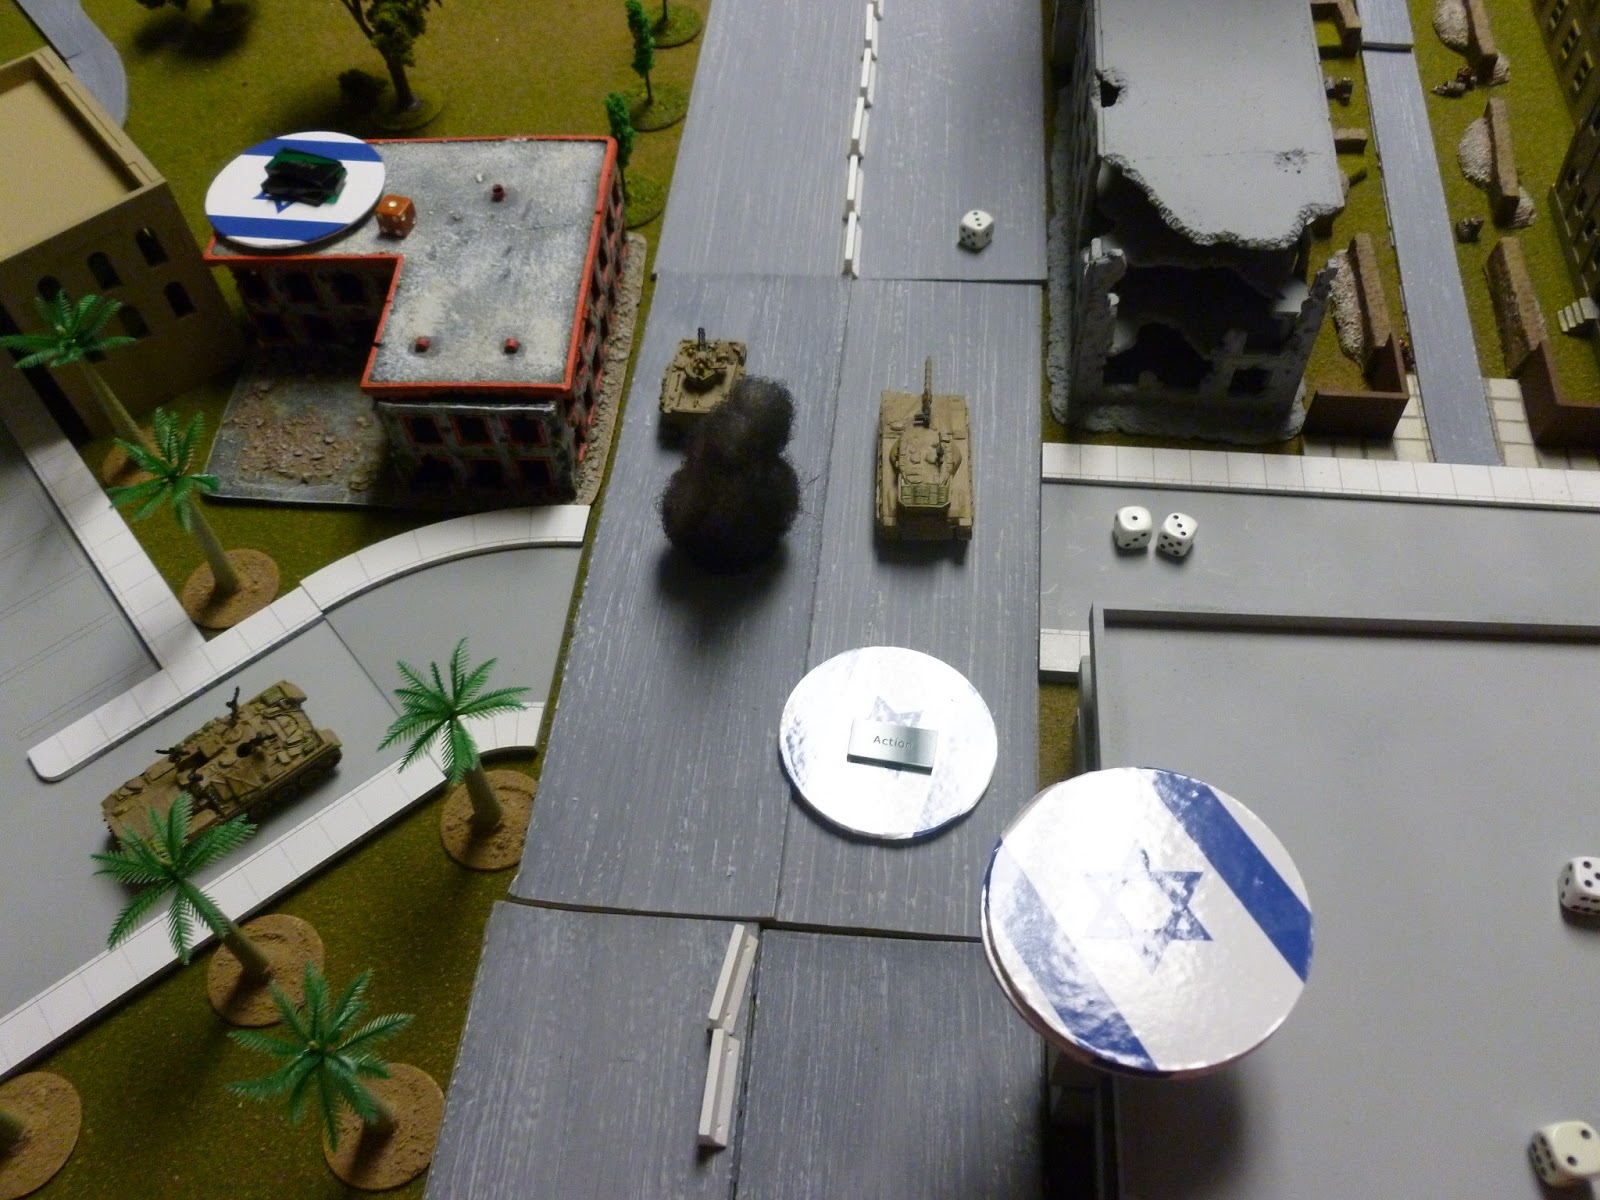  Just as the IDF Blind gained the rooftop, the PLO got some fire-support from its mortar teams,&nbsp;firing on a pre-registered spot in the intersection. This fire did little to slow the IDF advance. 